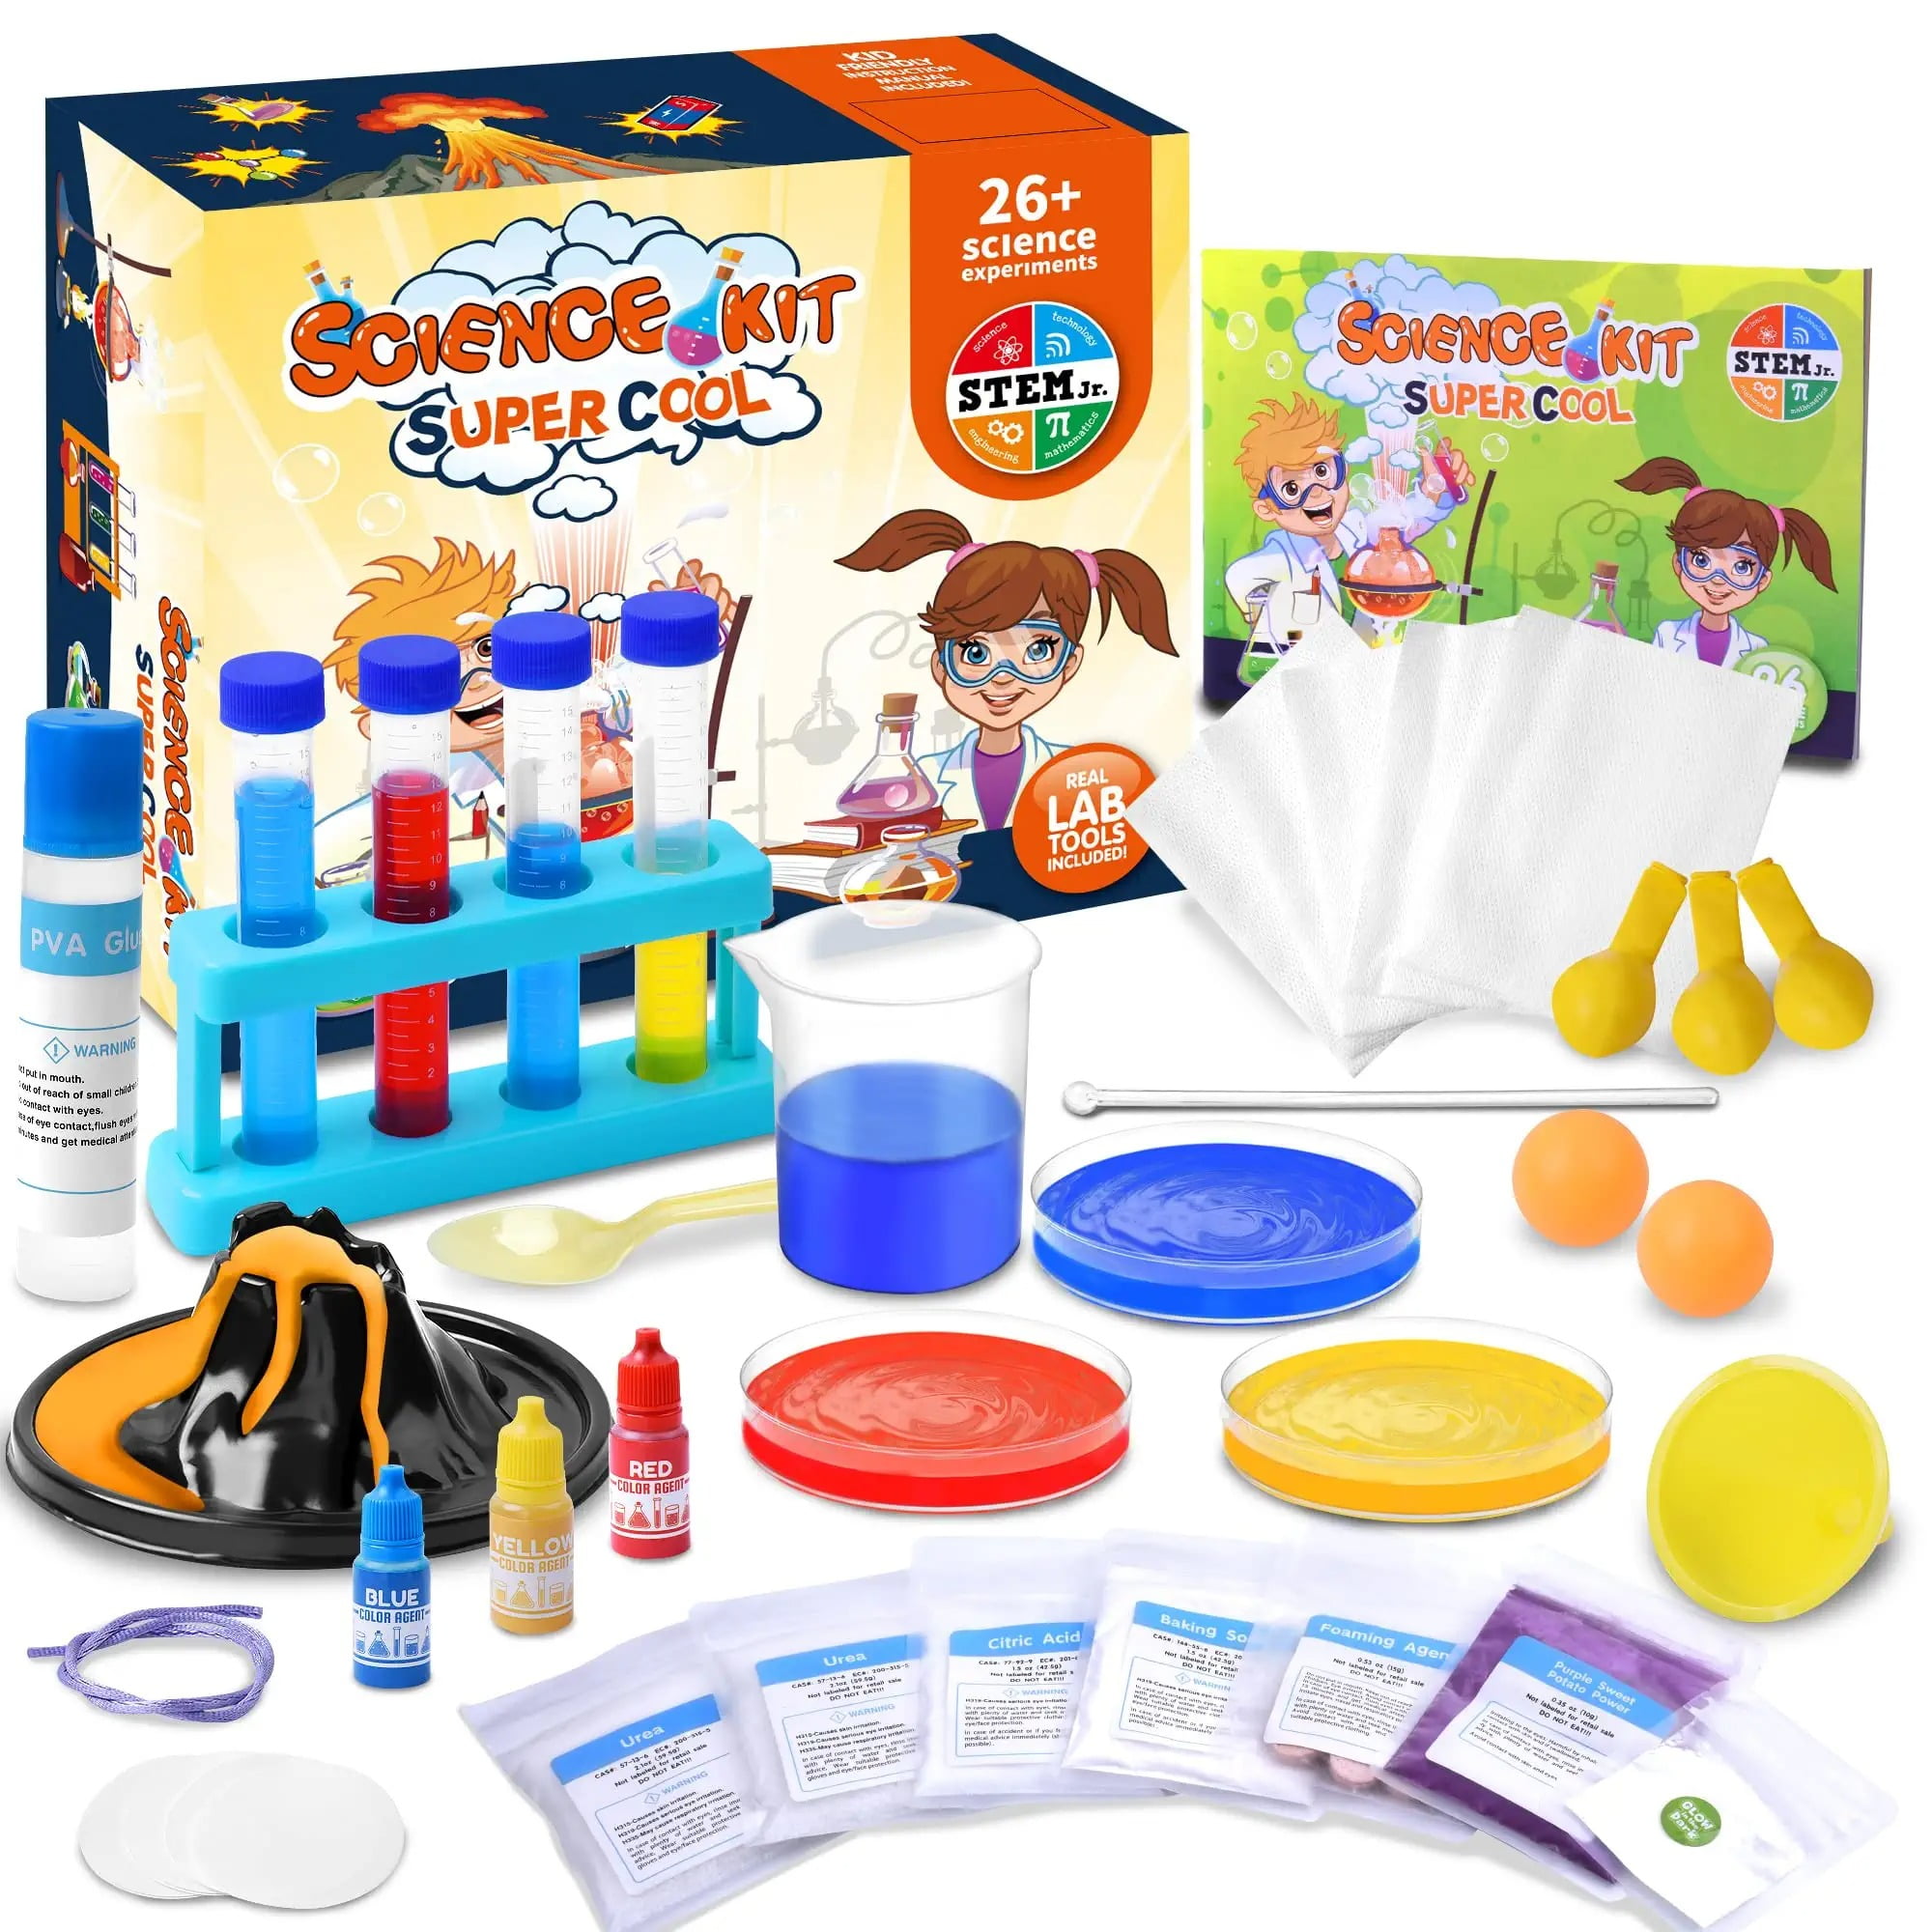  Science Kit for Kids 6-8, 52 Science Lab Experiments for Kids  4-6, STEM Educational Learning Kids Science Kits Age 8-12, Scientific Toys  Gift for Girls and Boys Age 3-5 : Toys & Games